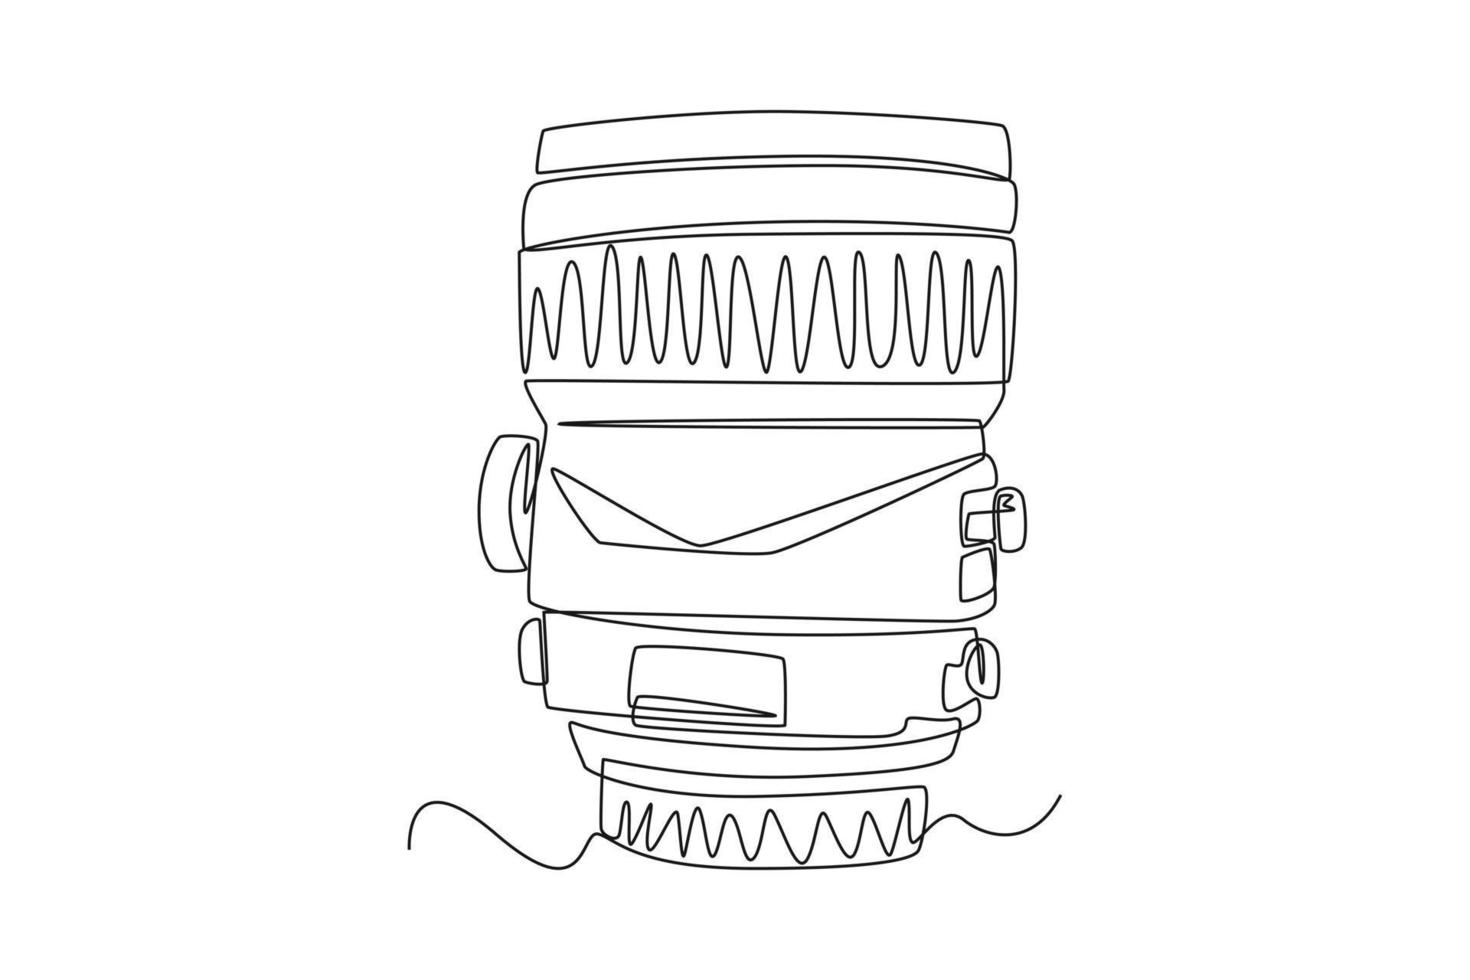 Continuous one line drawing camera lens. Video shooting tools concept. Single line draw design vector graphic illustration.